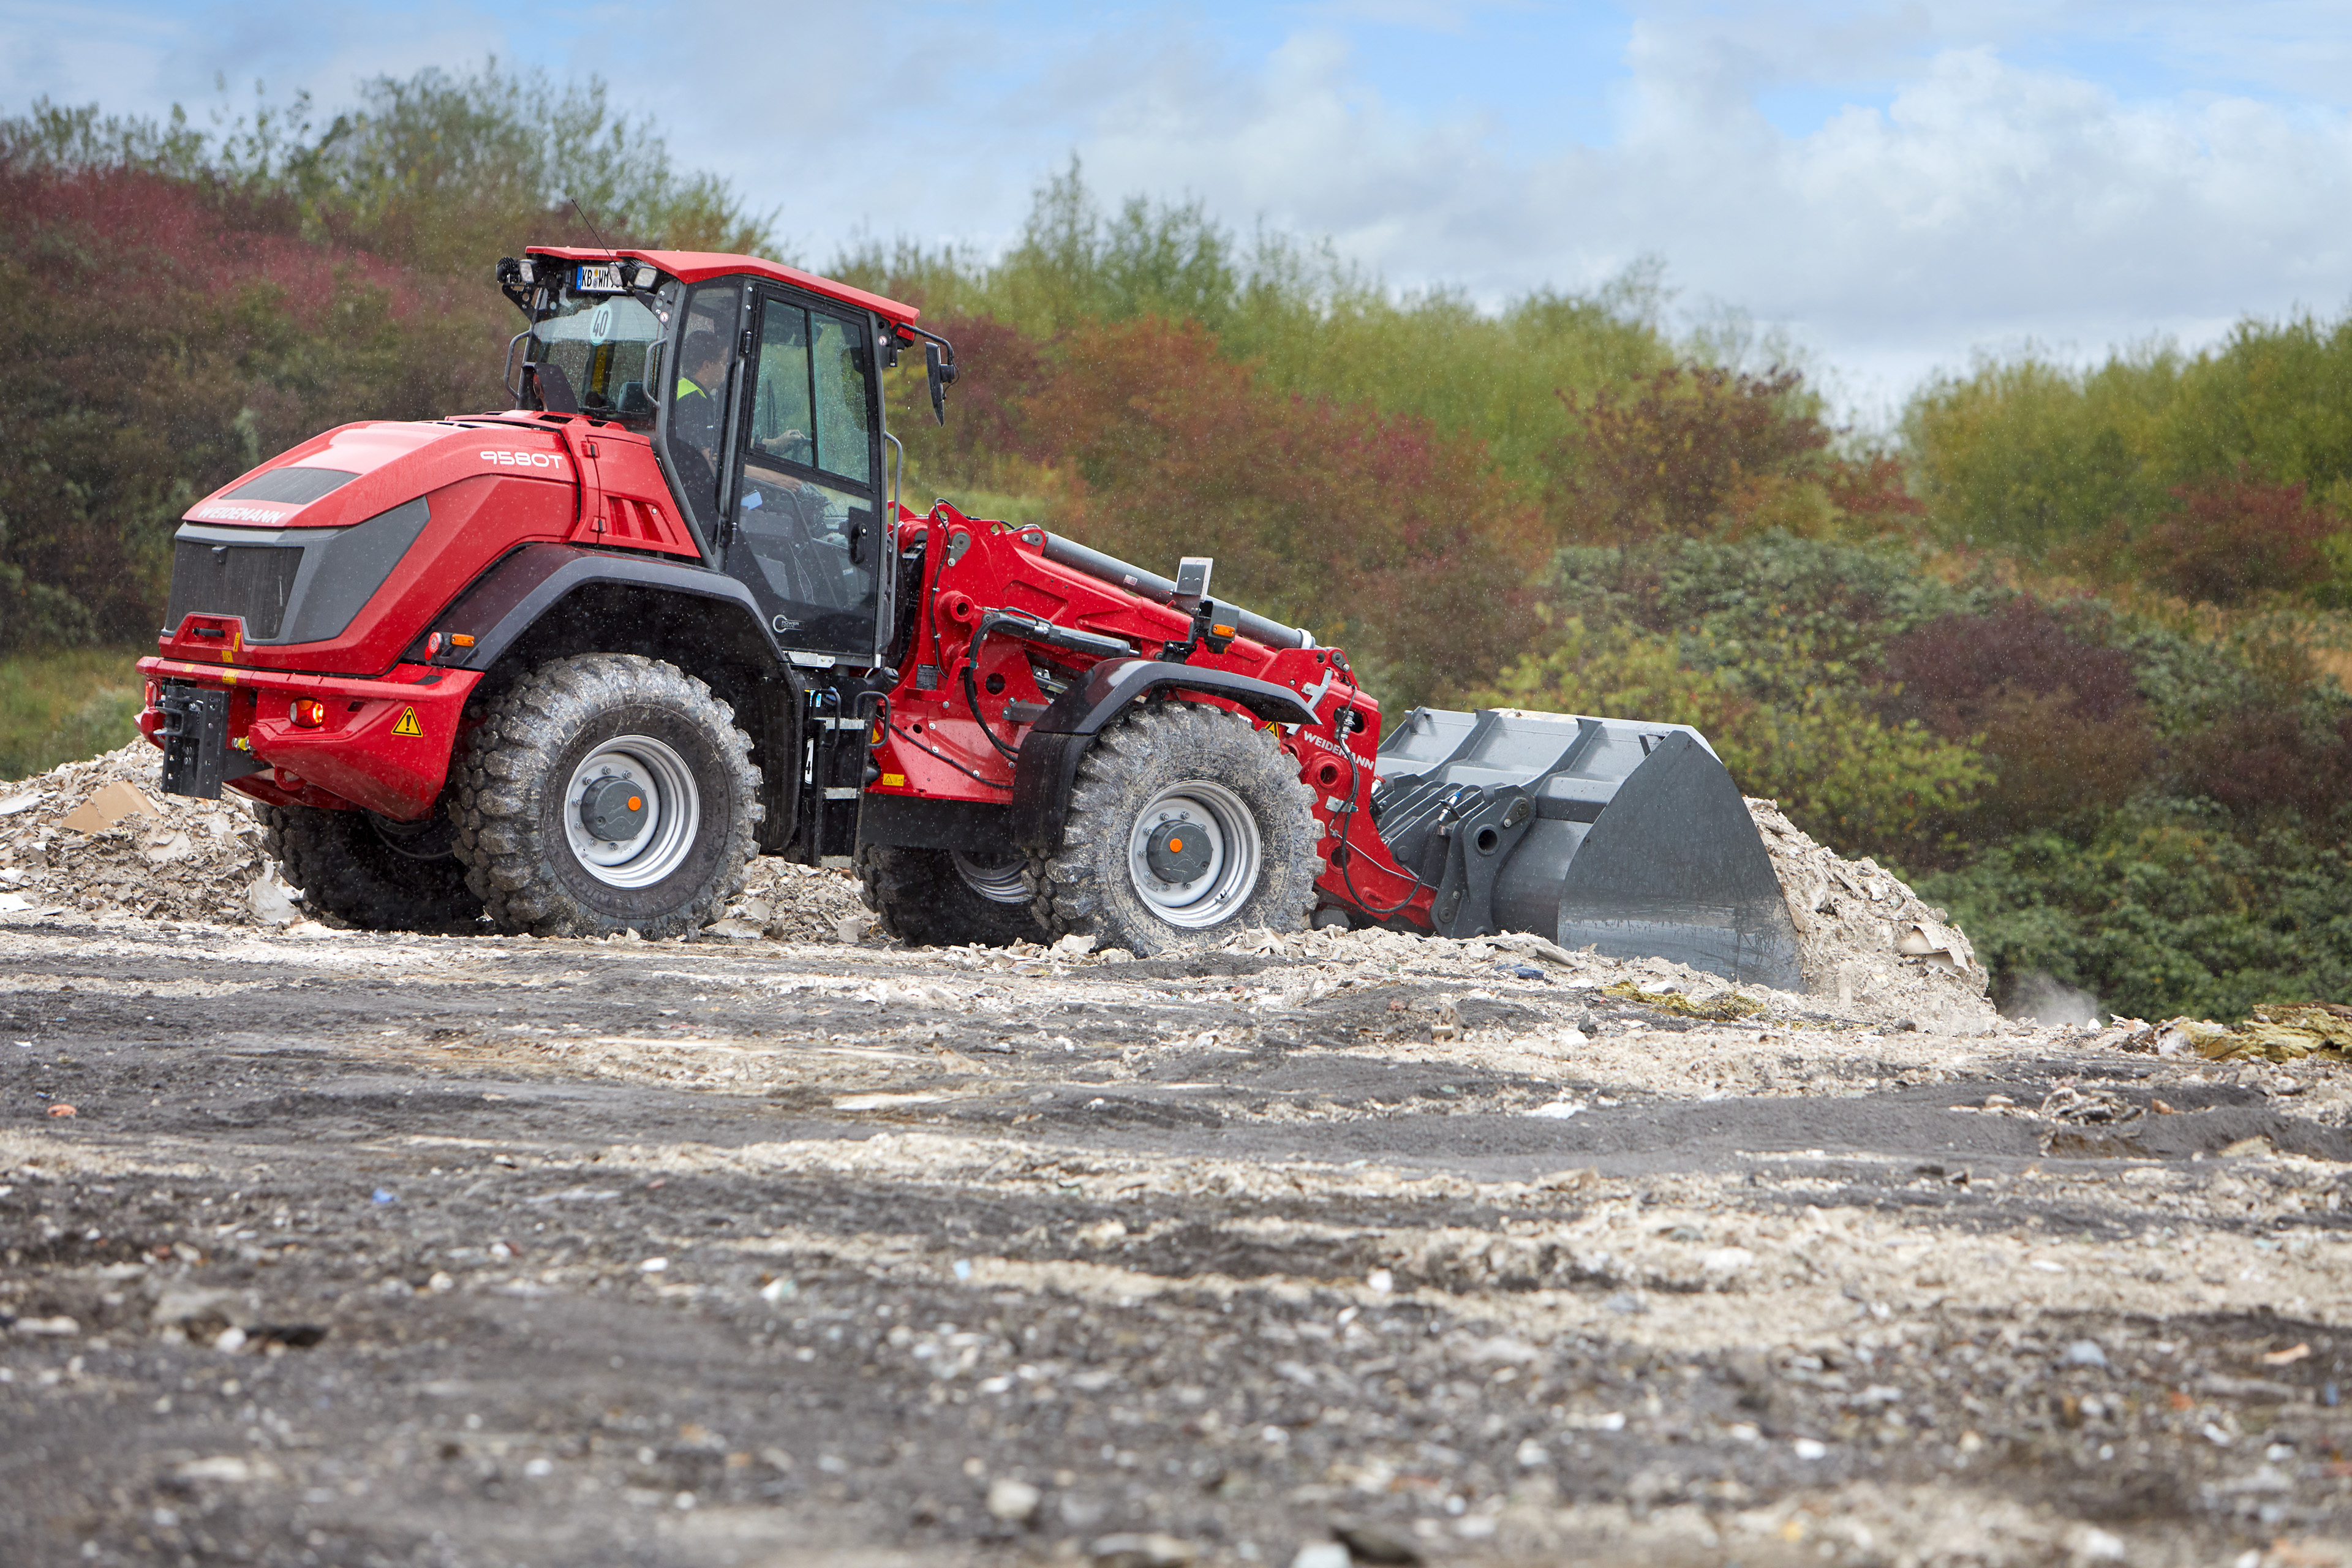 Weidemann tele wheel loader 9580T in use with earth bucket in recycling operation